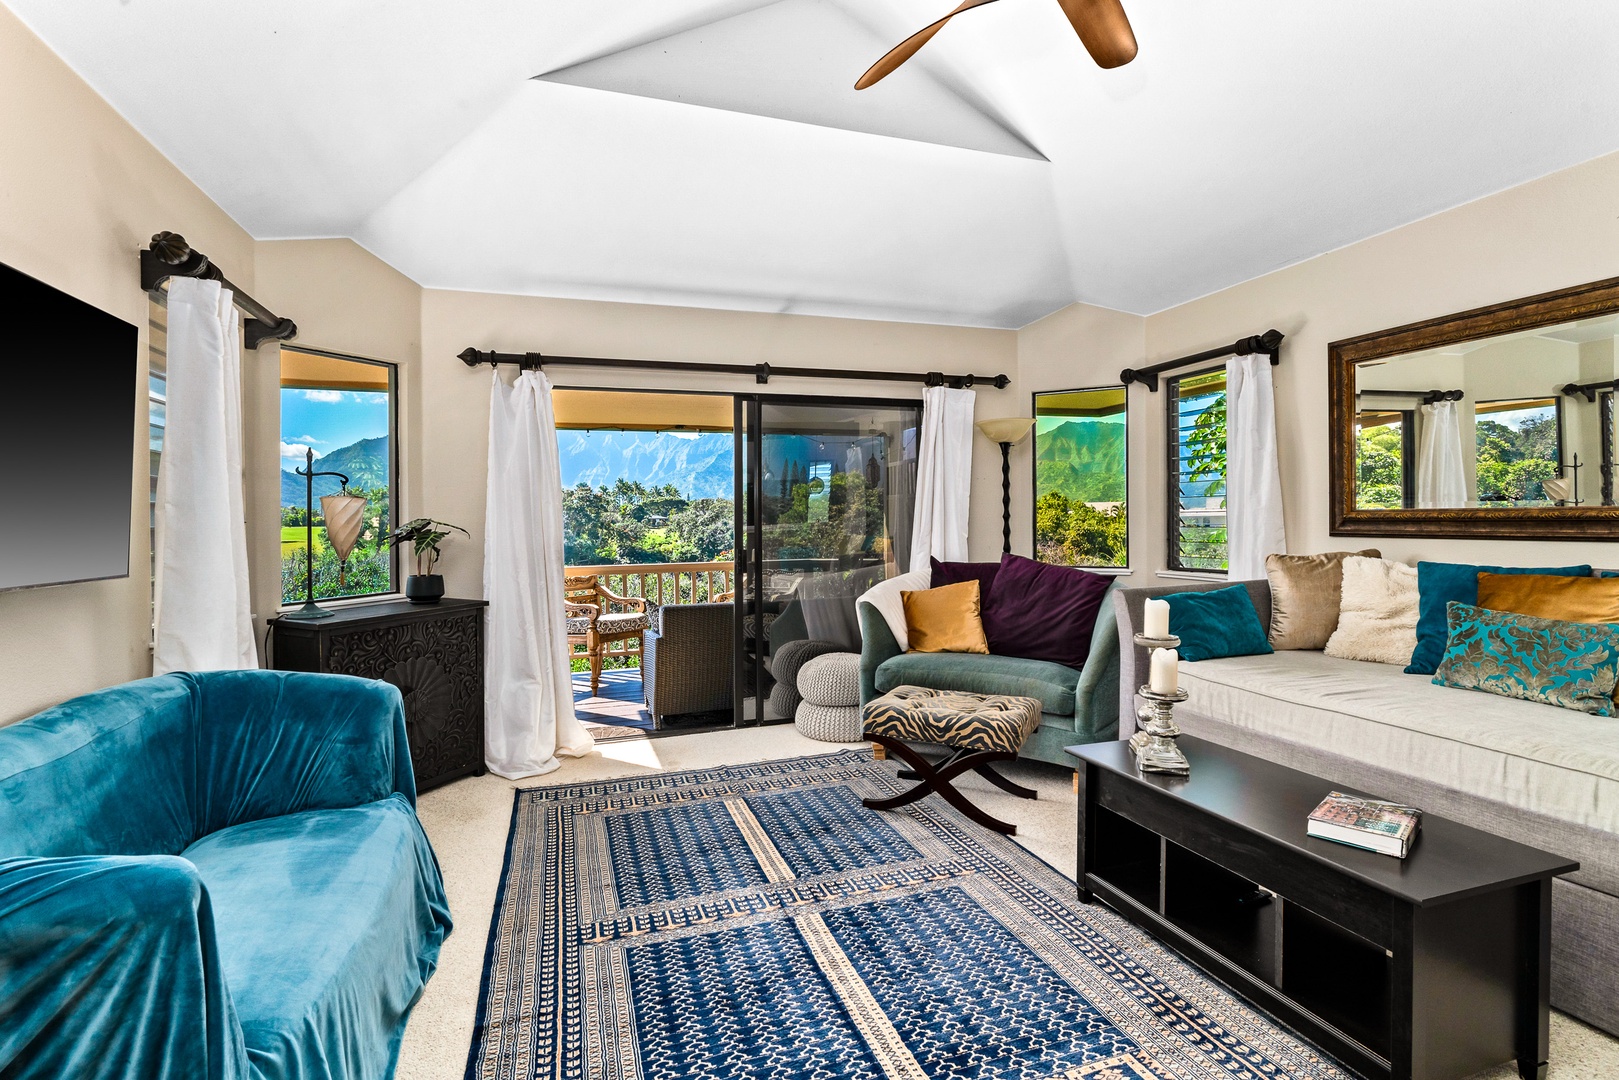 Princeville Vacation Rentals, Makanalani - Our open floorplan seamlessly leads to the lanai, blending indoor comfort with the beauty of outdoor living.